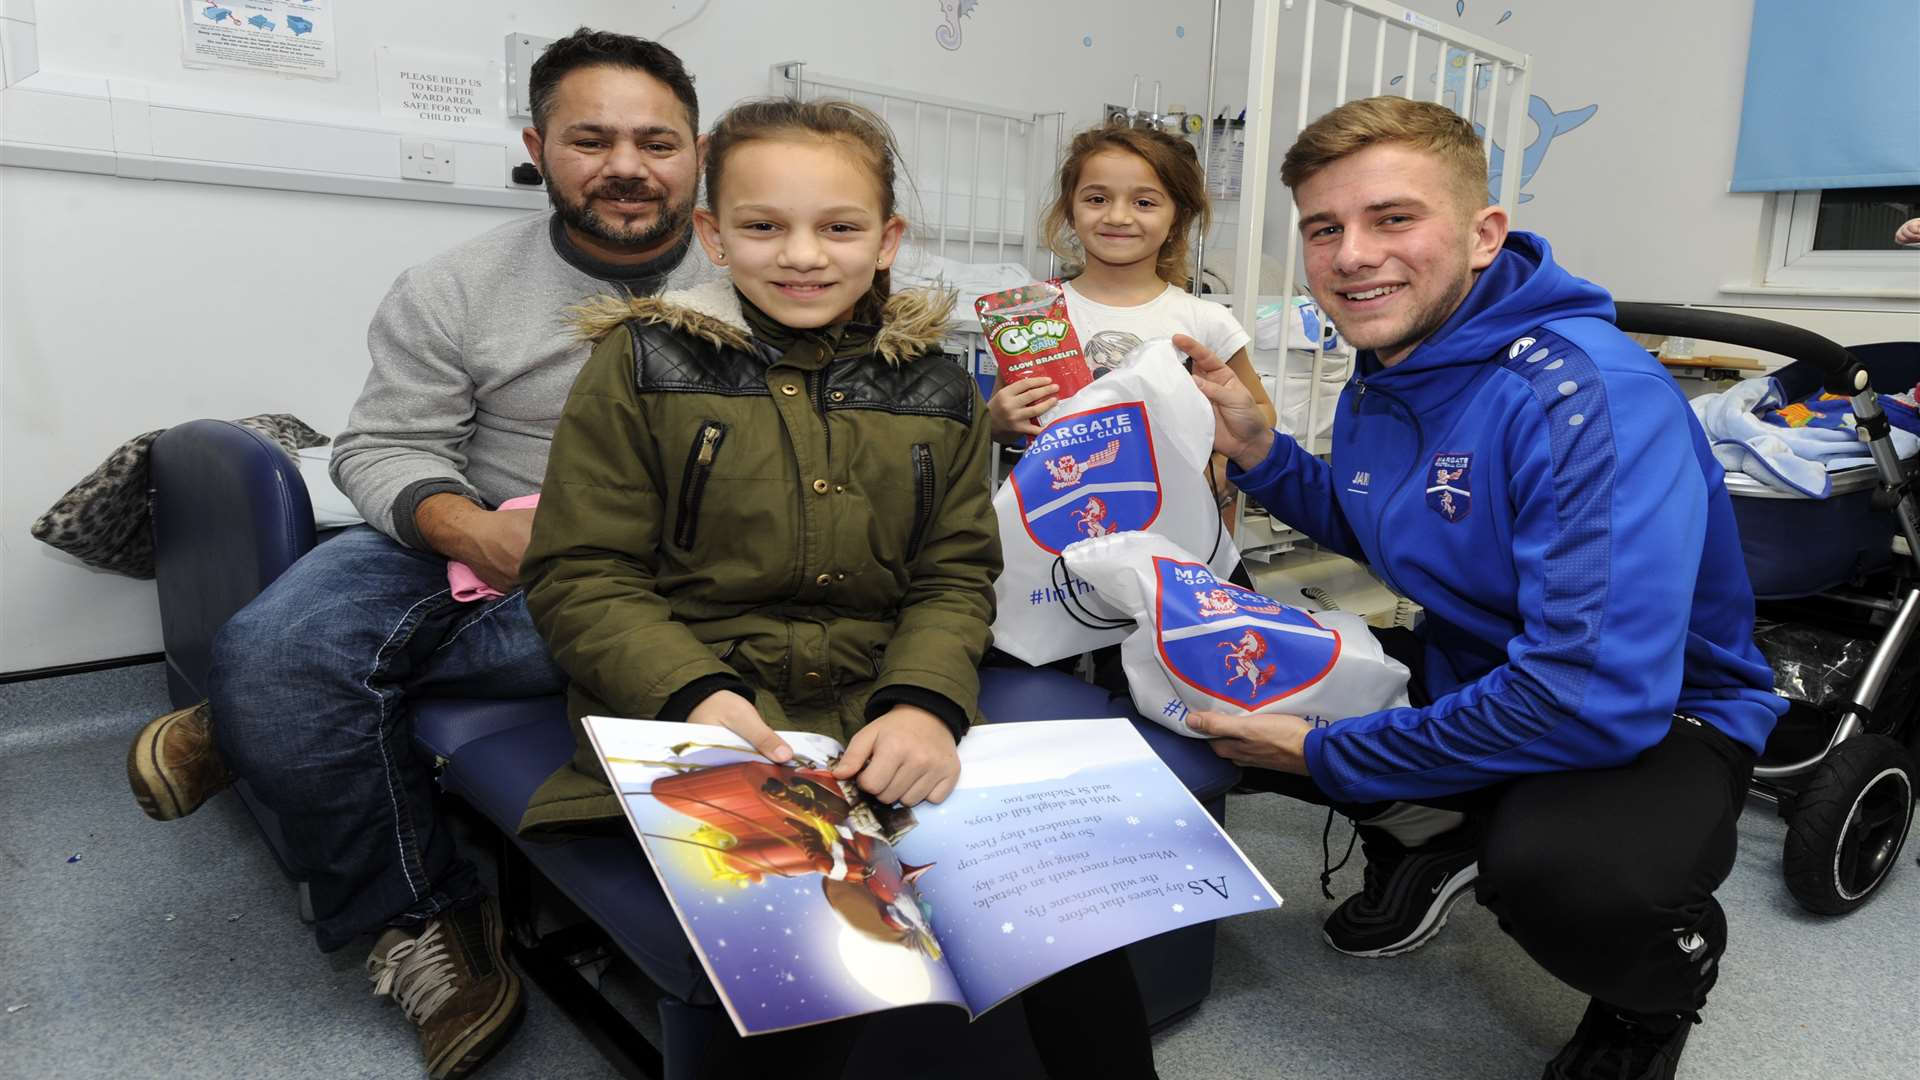 Margate defender Ben Swift with a family on Rainbow Ward